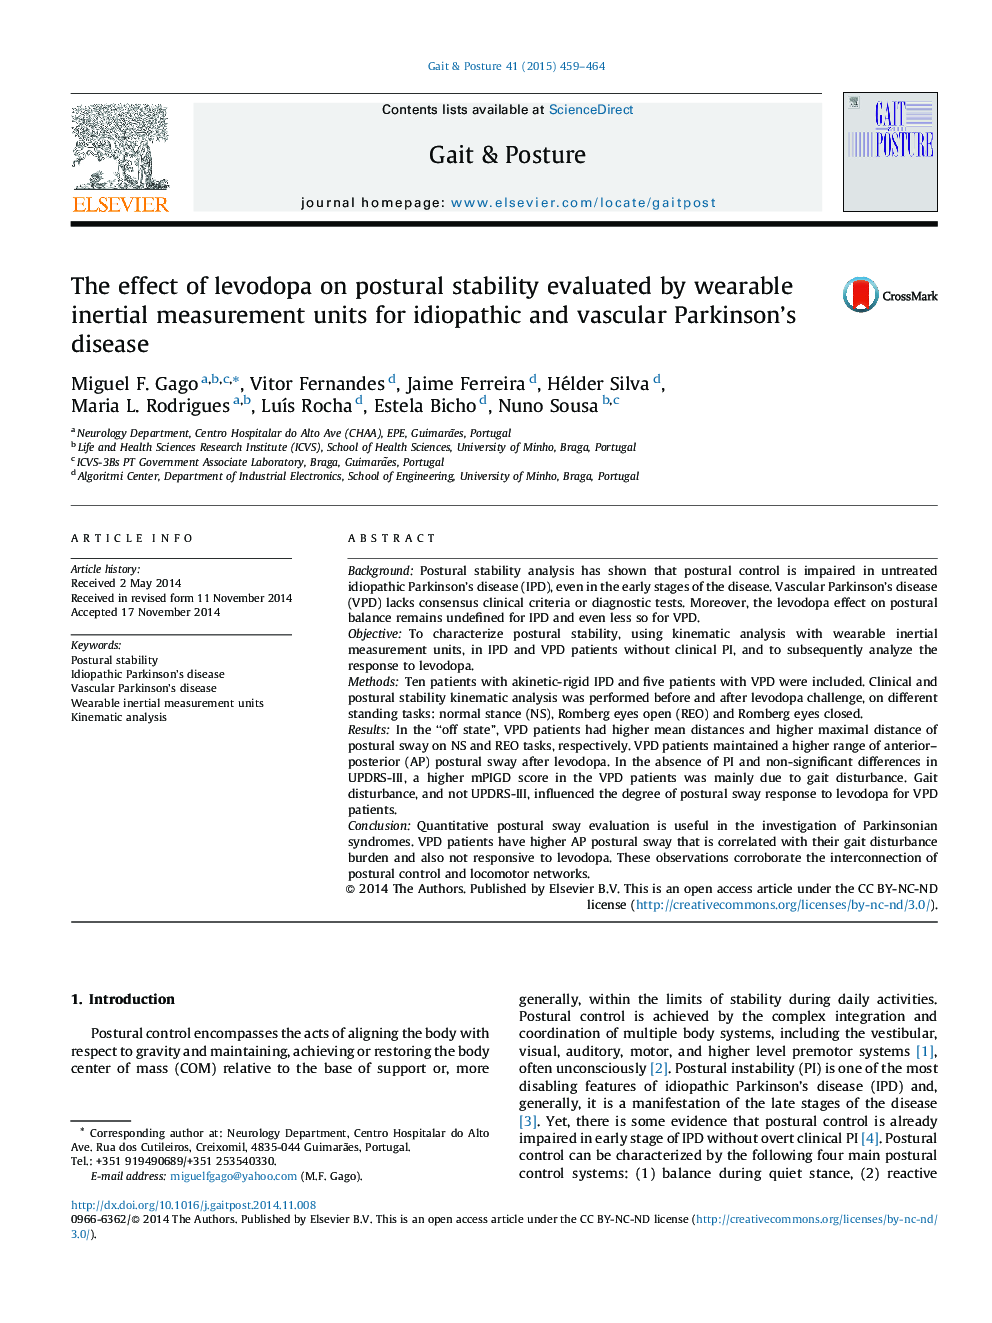 The effect of levodopa on postural stability evaluated by wearable inertial measurement units for idiopathic and vascular Parkinson's disease